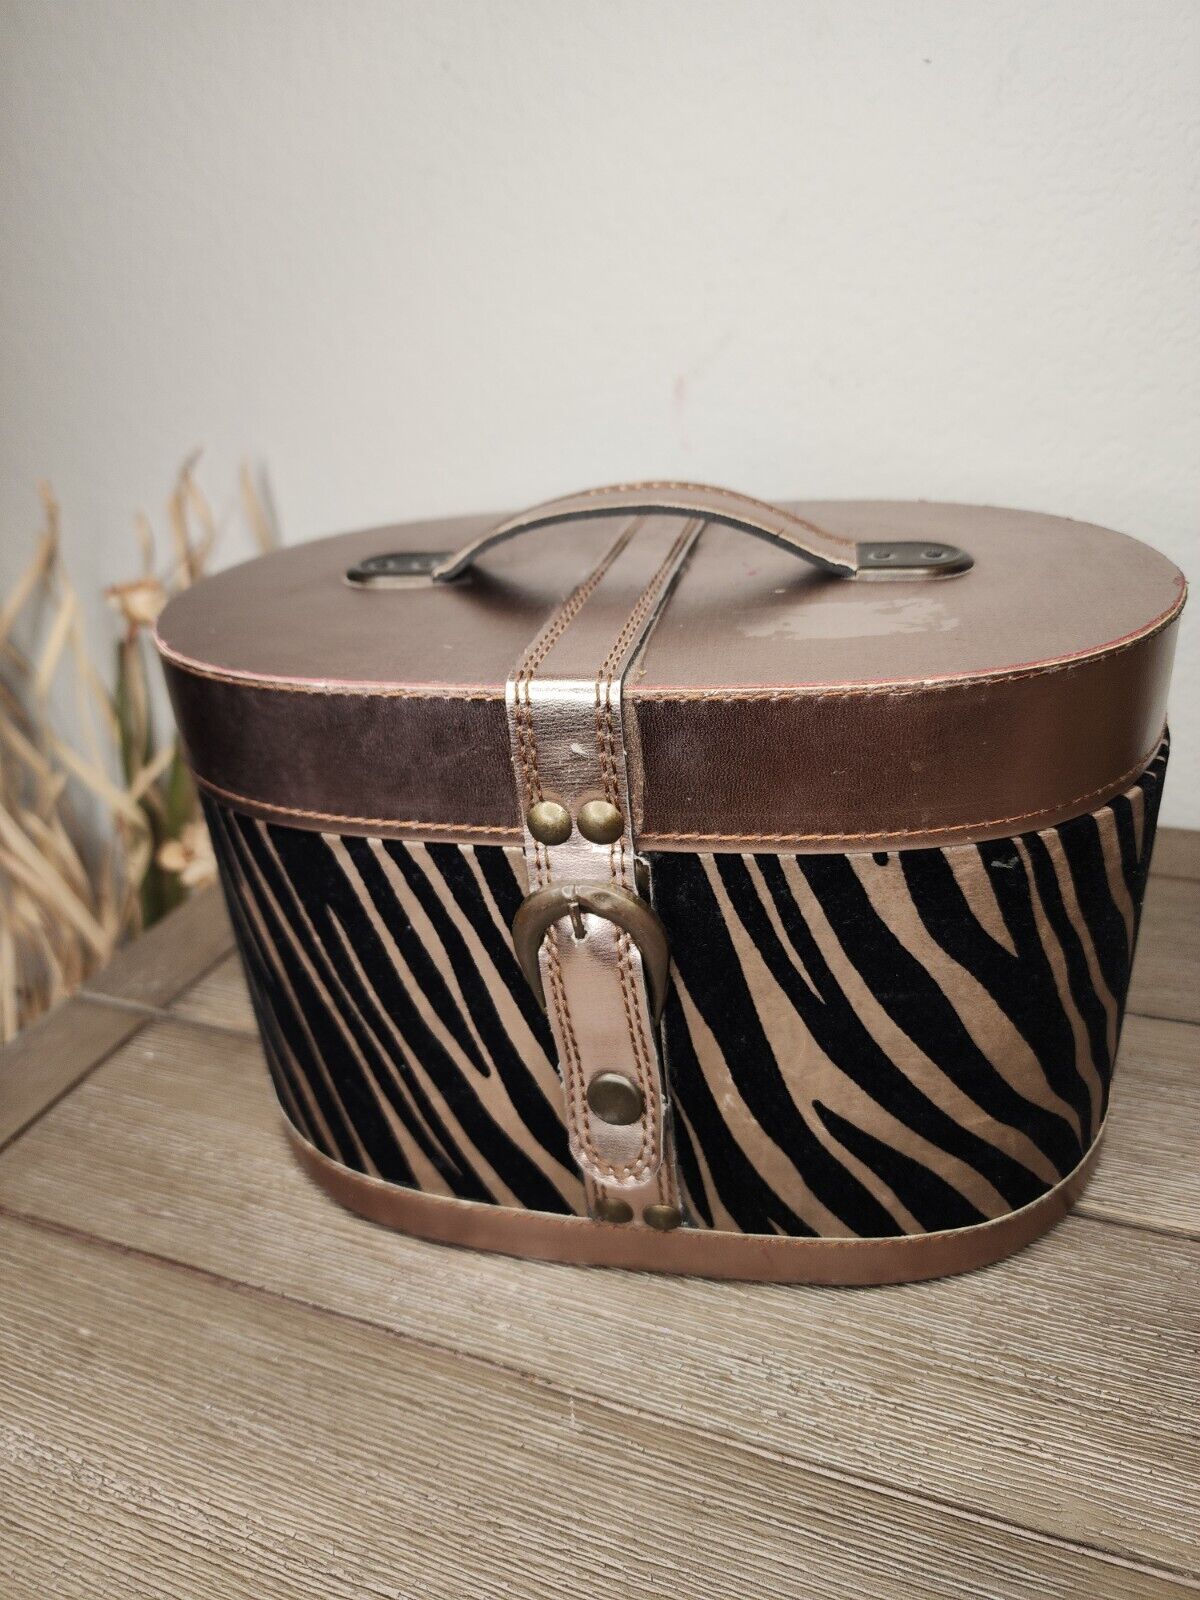 Oval Animal Print Storage Box with Faux Leather and Faux Animal Fabric Trim\